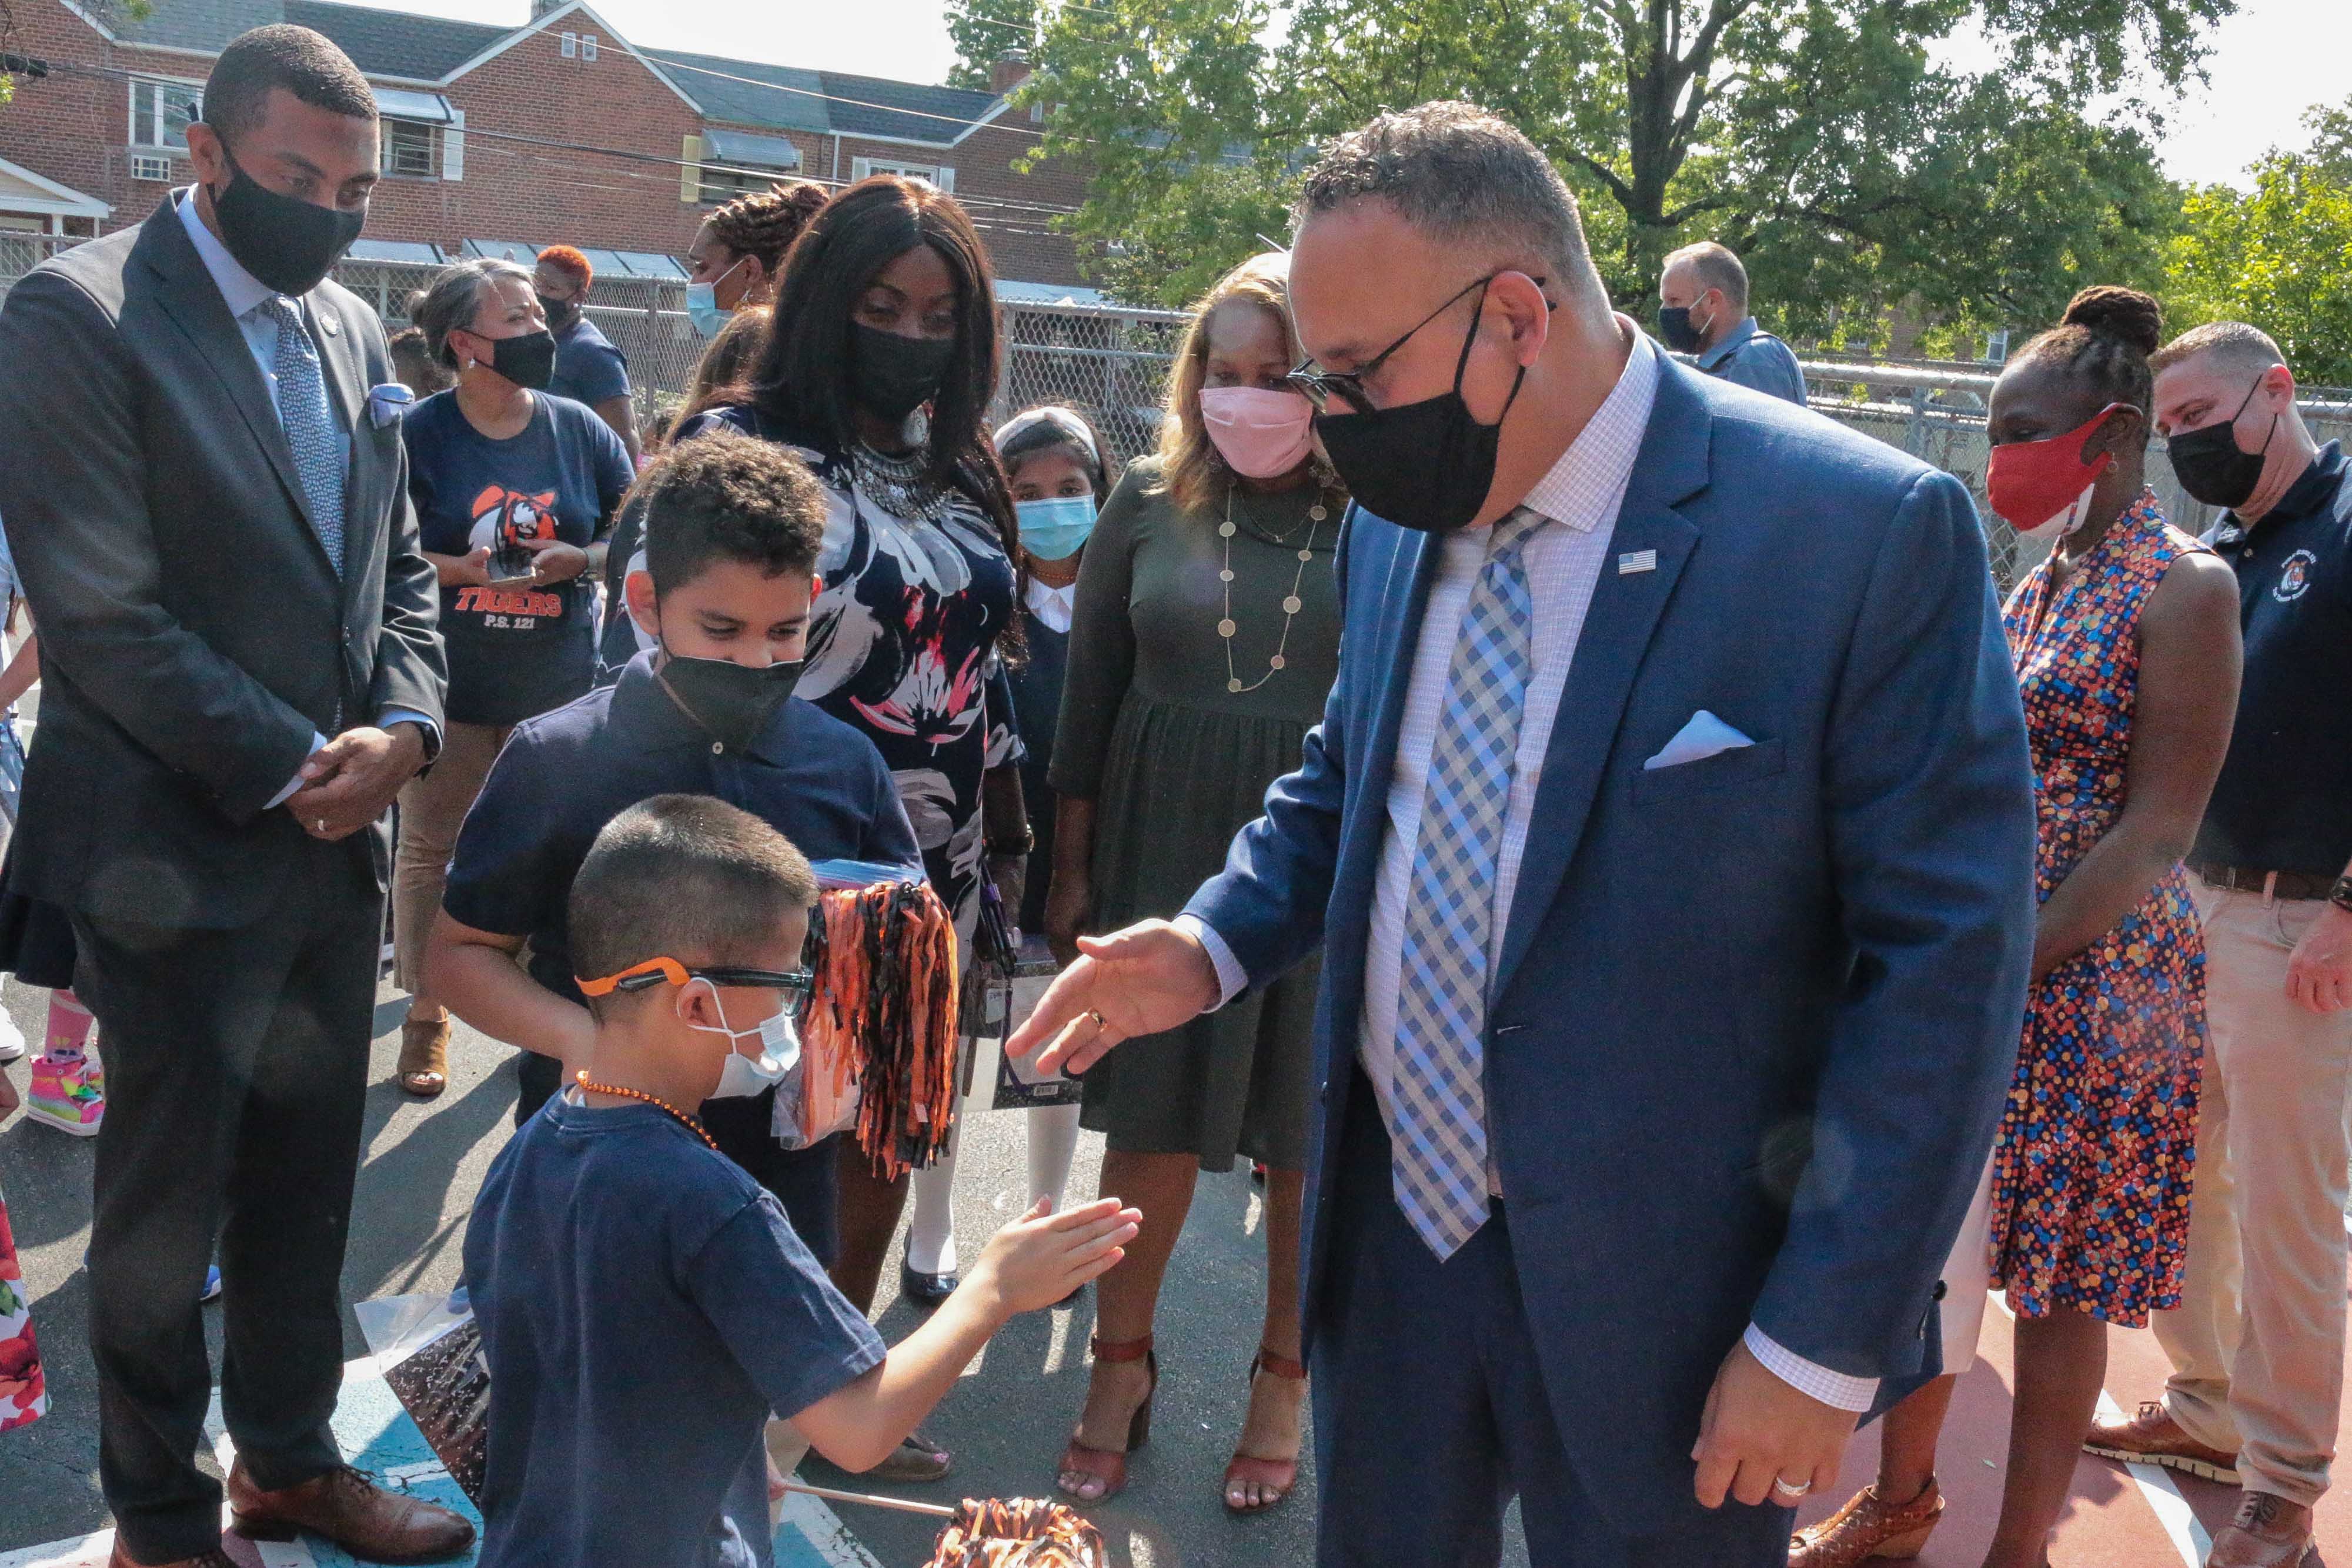 U.S. Secretary of Education Miguel Cardona meets with students on the first day of school at P.S. 121 in the Bronx.